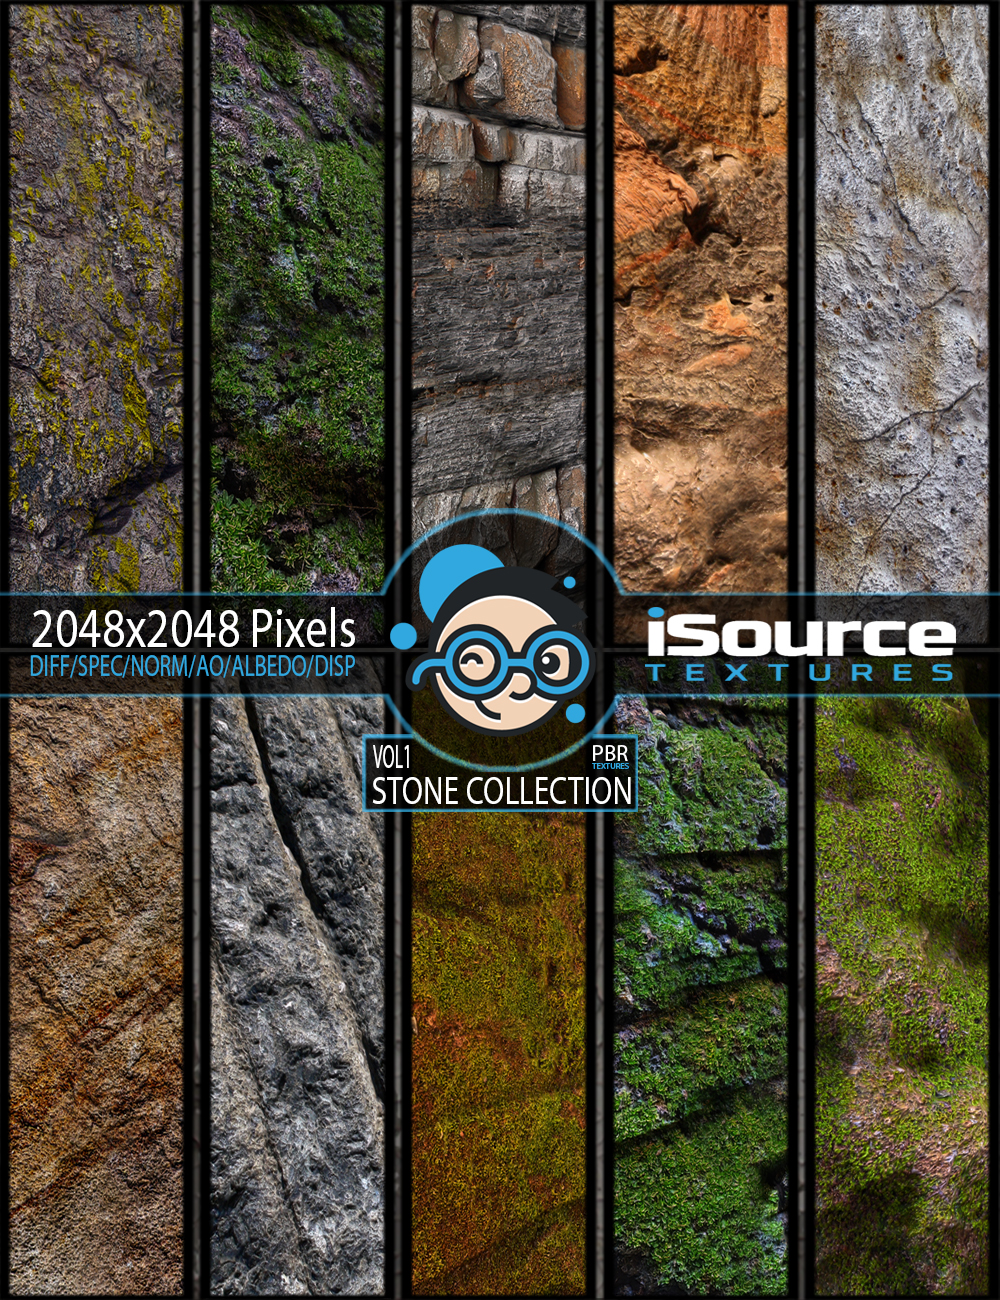 Stone Collection Merchant Resource - Vol1 (PBR Textures) by: iSourceTextures, 3D Models by Daz 3D